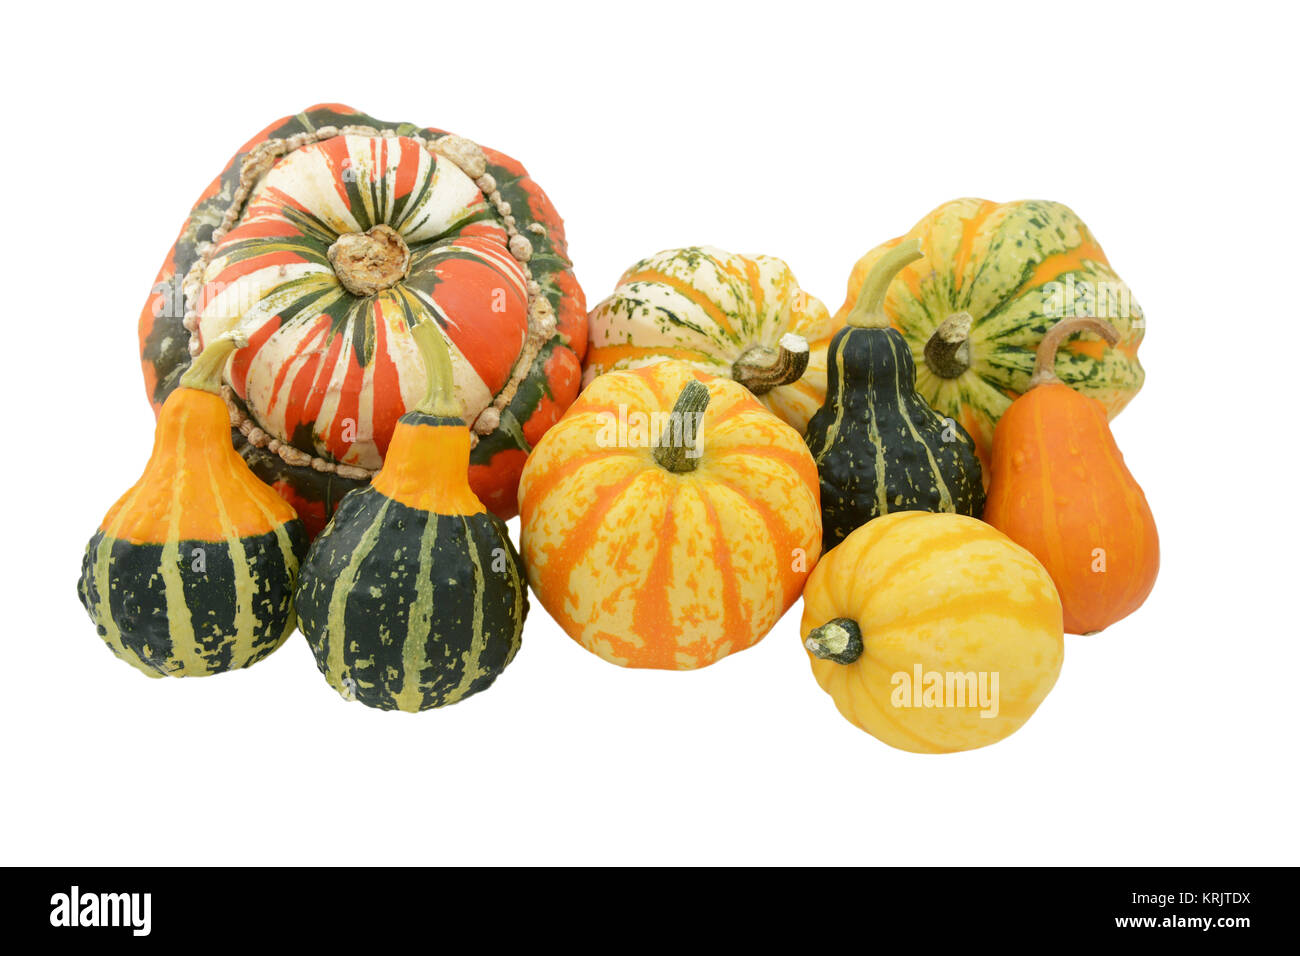 Selection of ornamental gourds with striped Turks turban squash Stock Photo